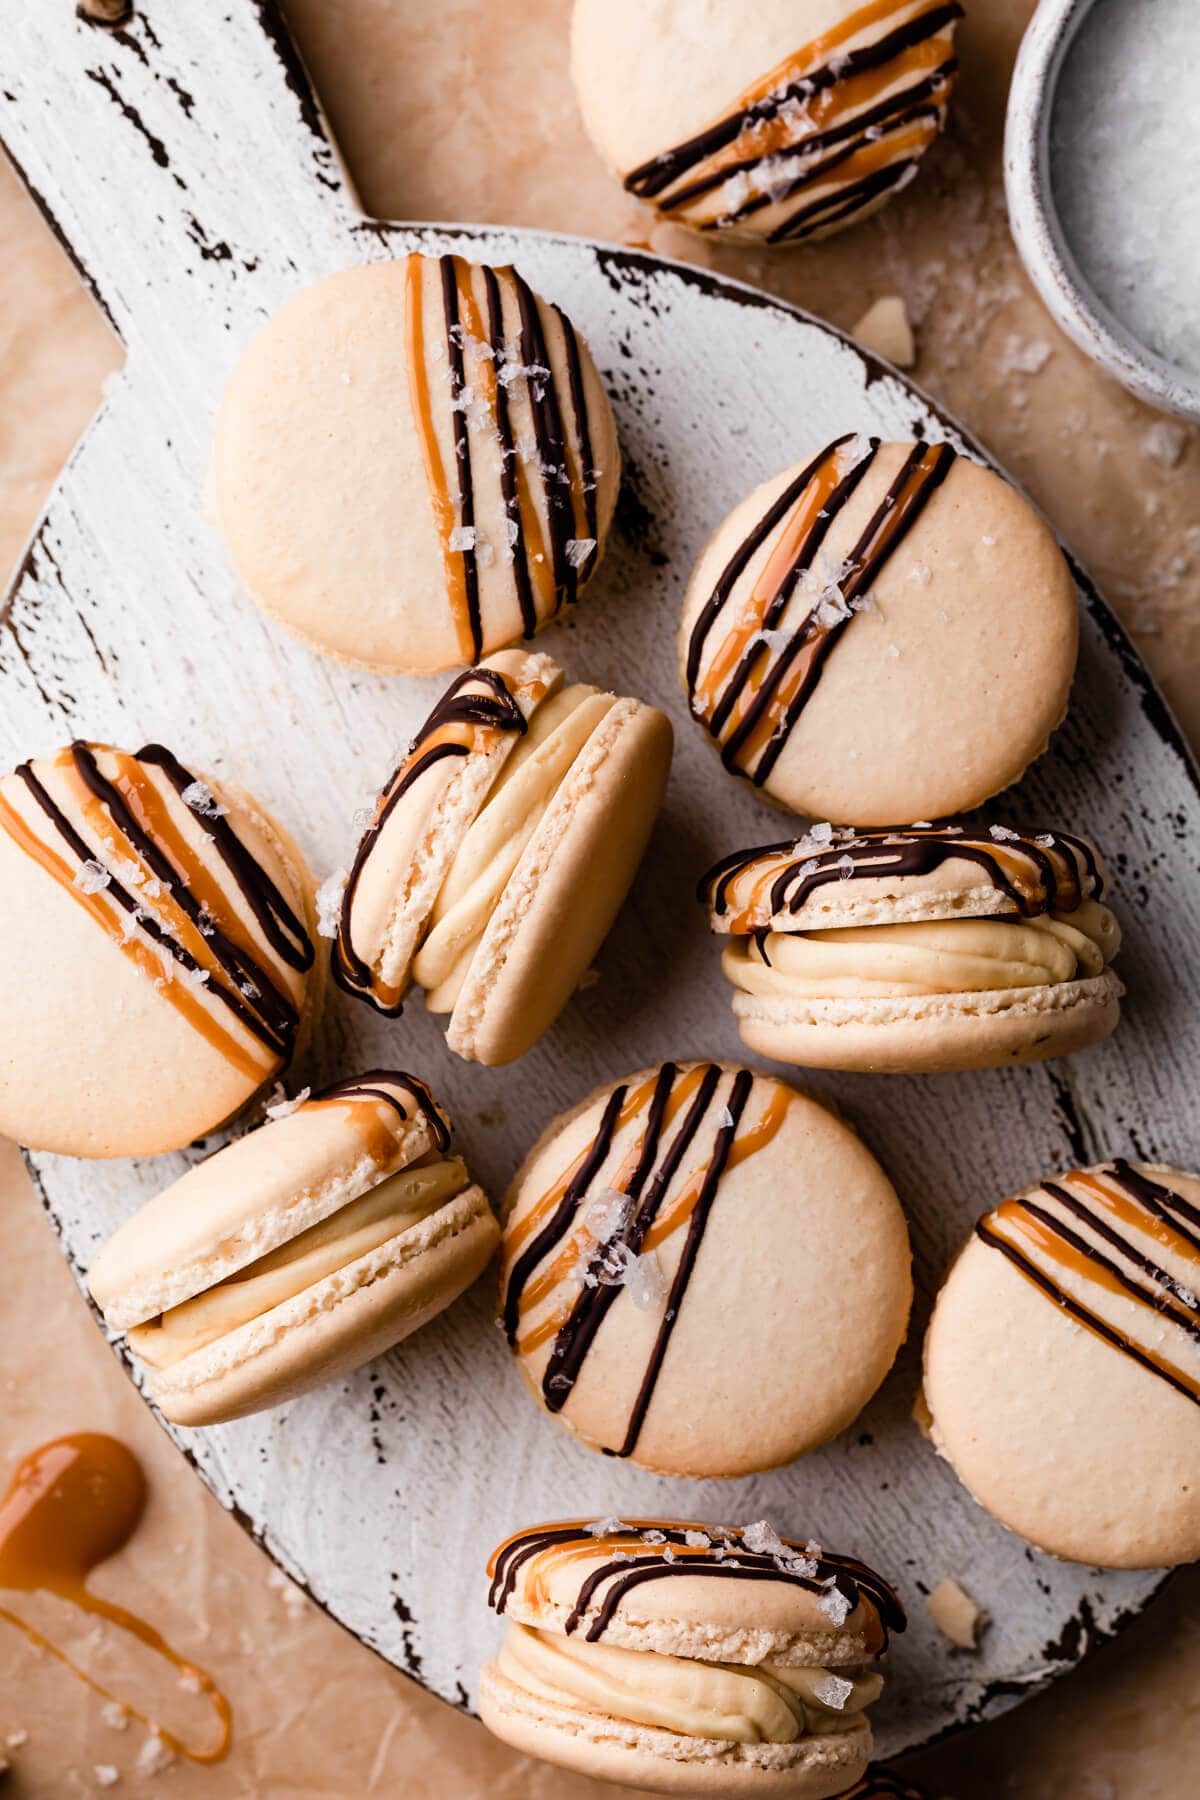 caramel macarons topped with chocolate and caramel drizzle and some sea salt flakes.